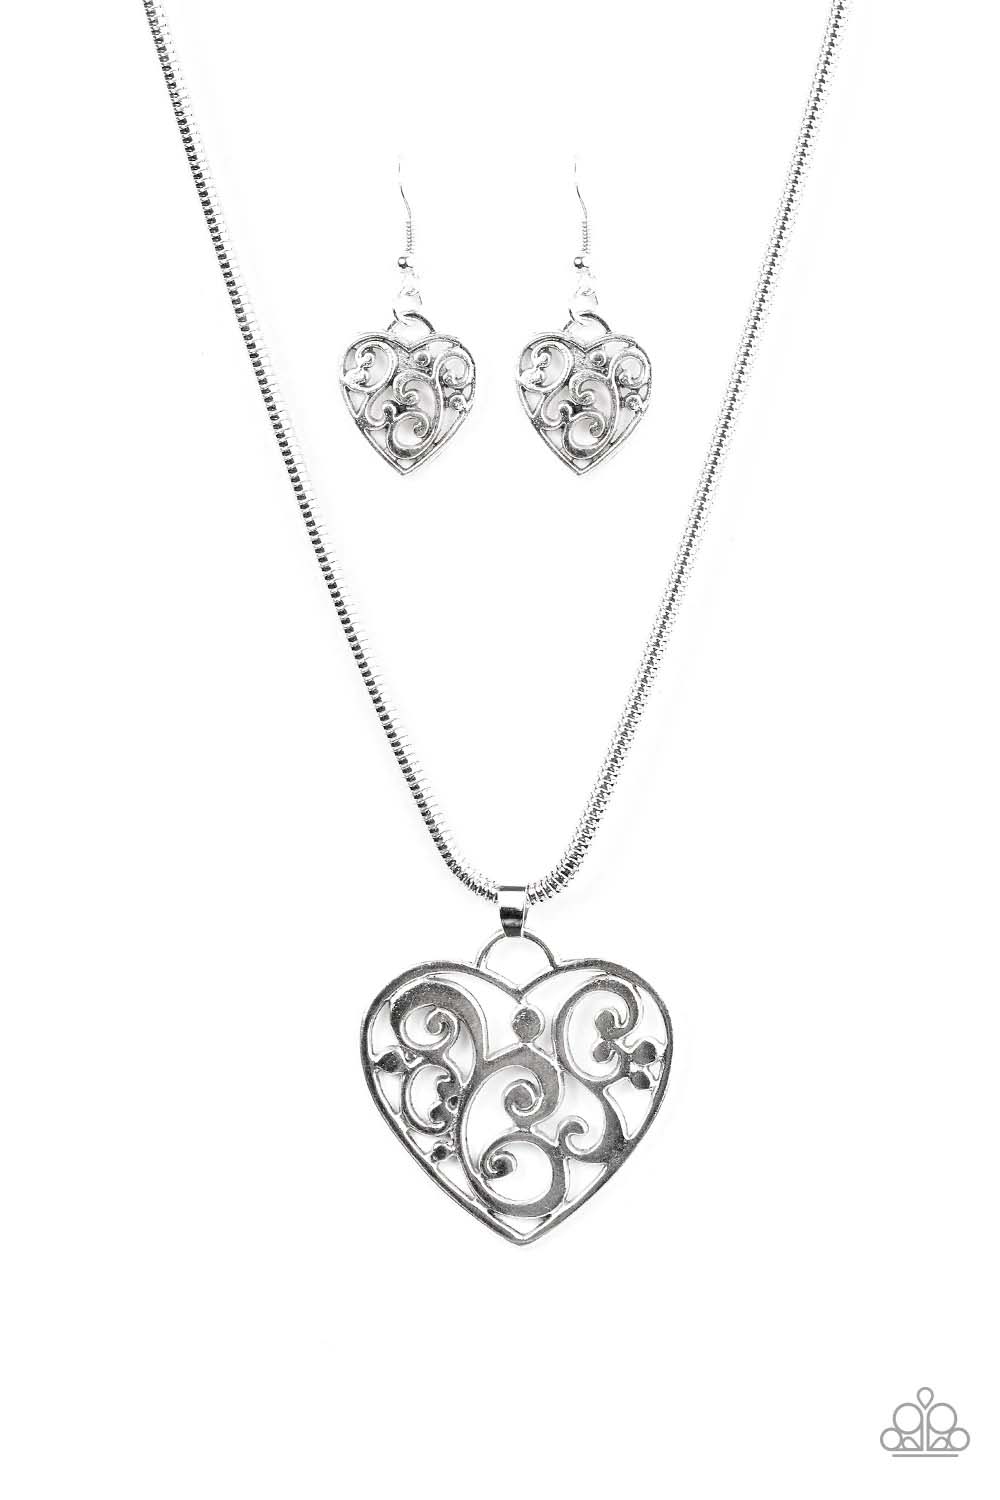 Filigree Your Heart With Love - silver - Paparazzi necklace